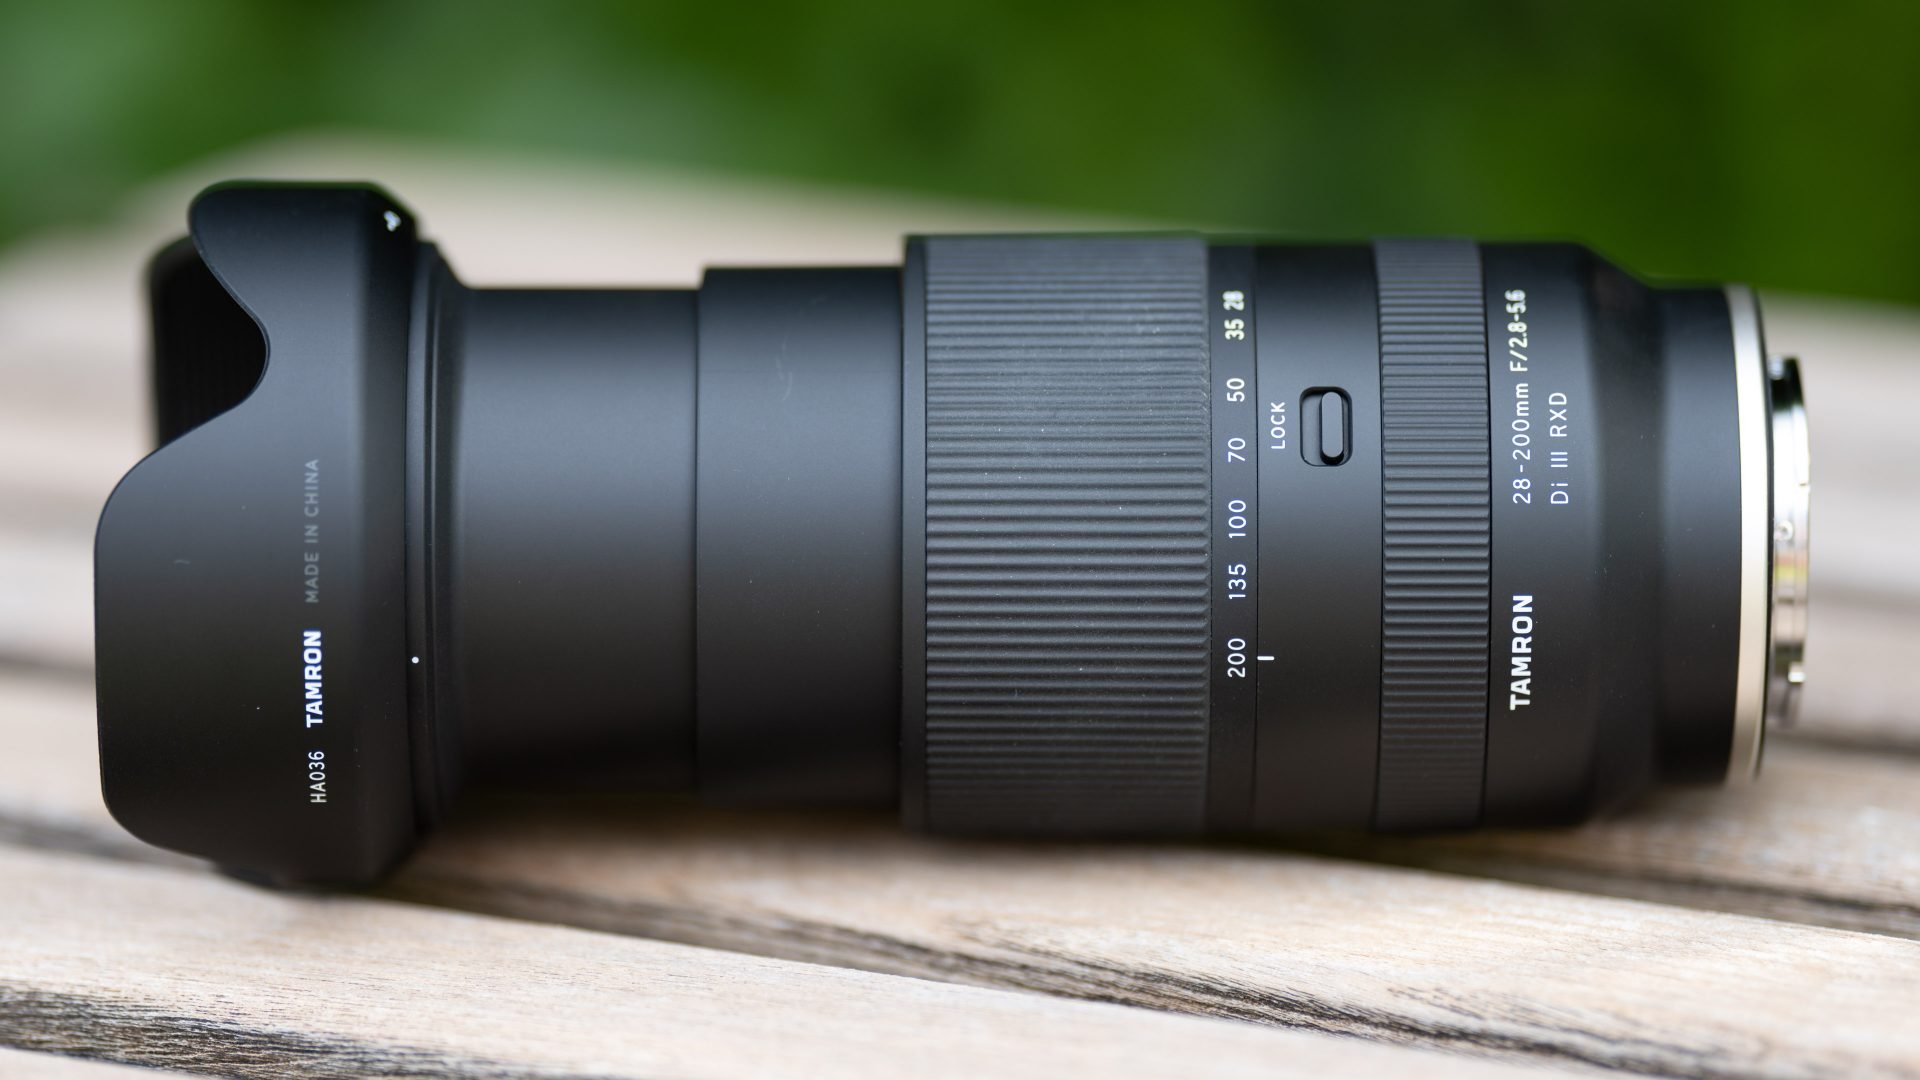 Tamron 28-200mm f2.8-5.6 Di III RXD review | Cameralabs